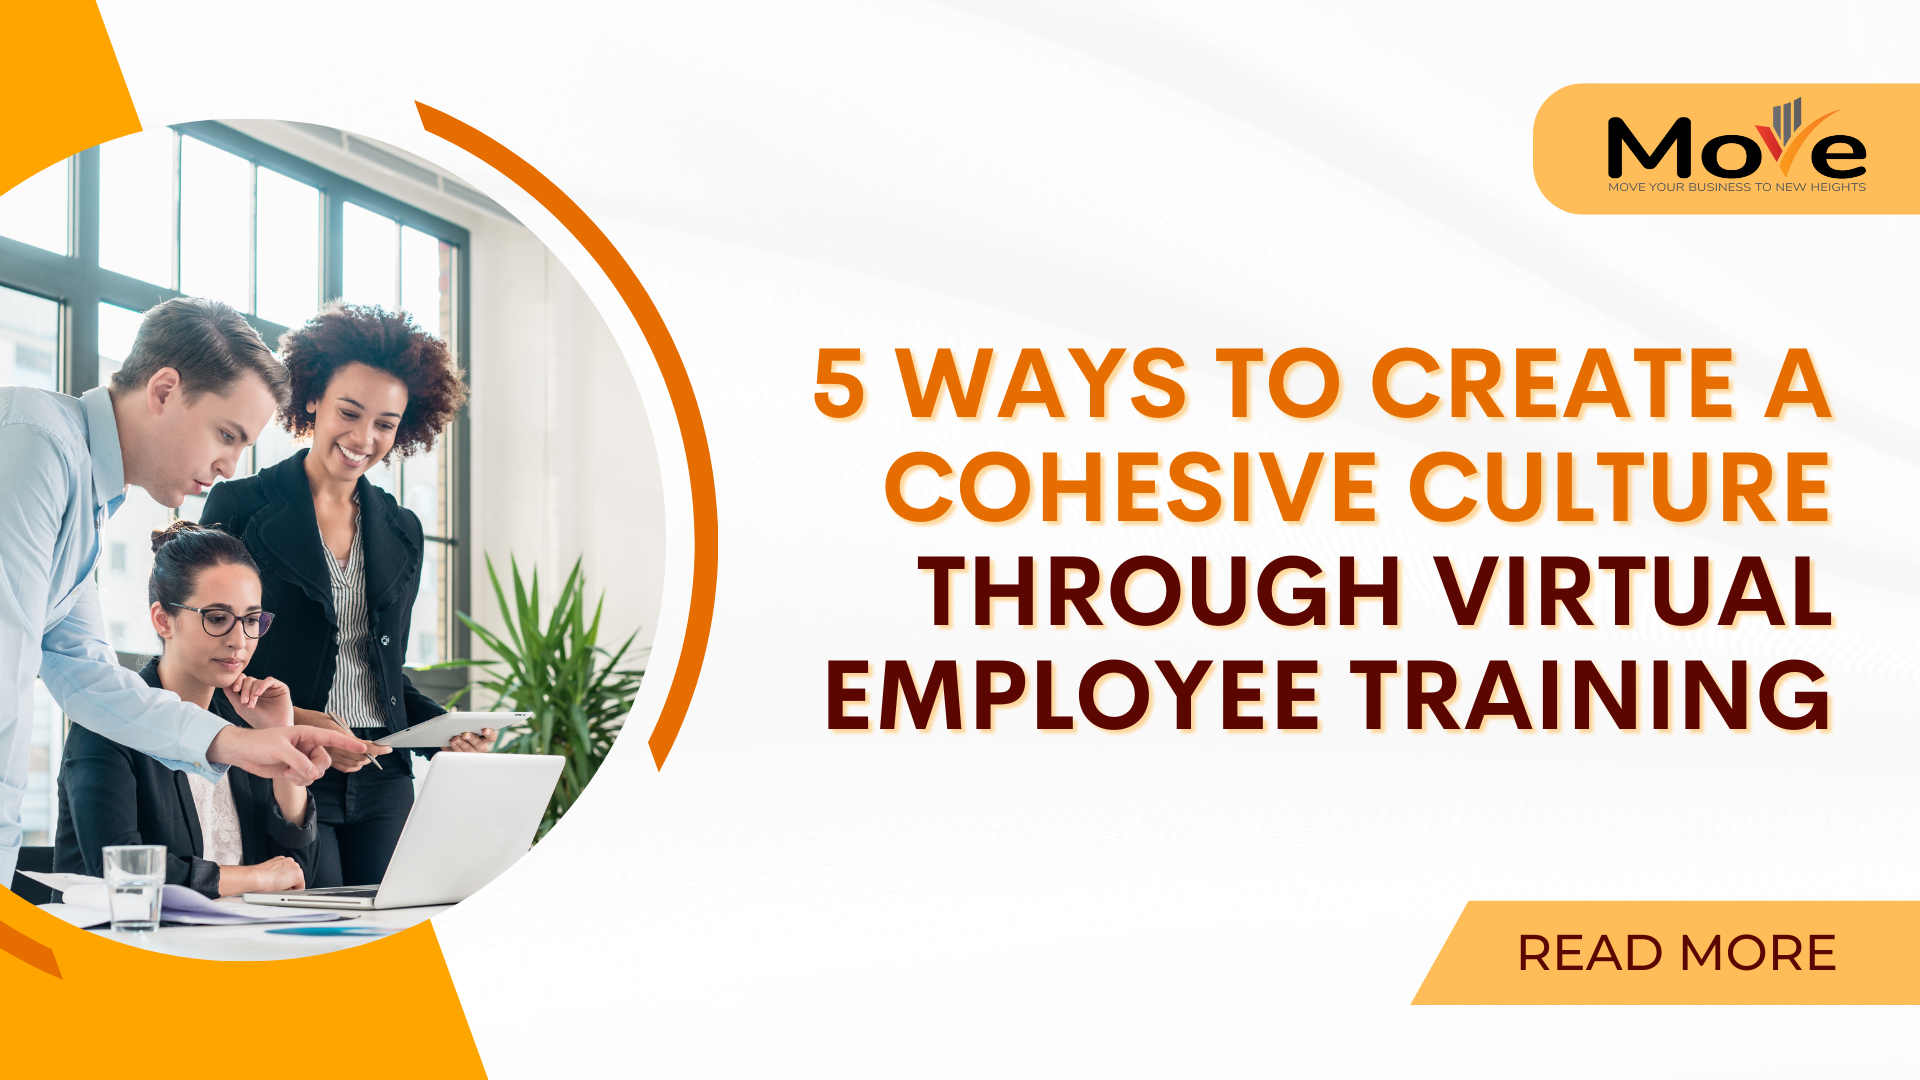 5 Ways to Create a Cohesive Culture Through Virtual Employee Training